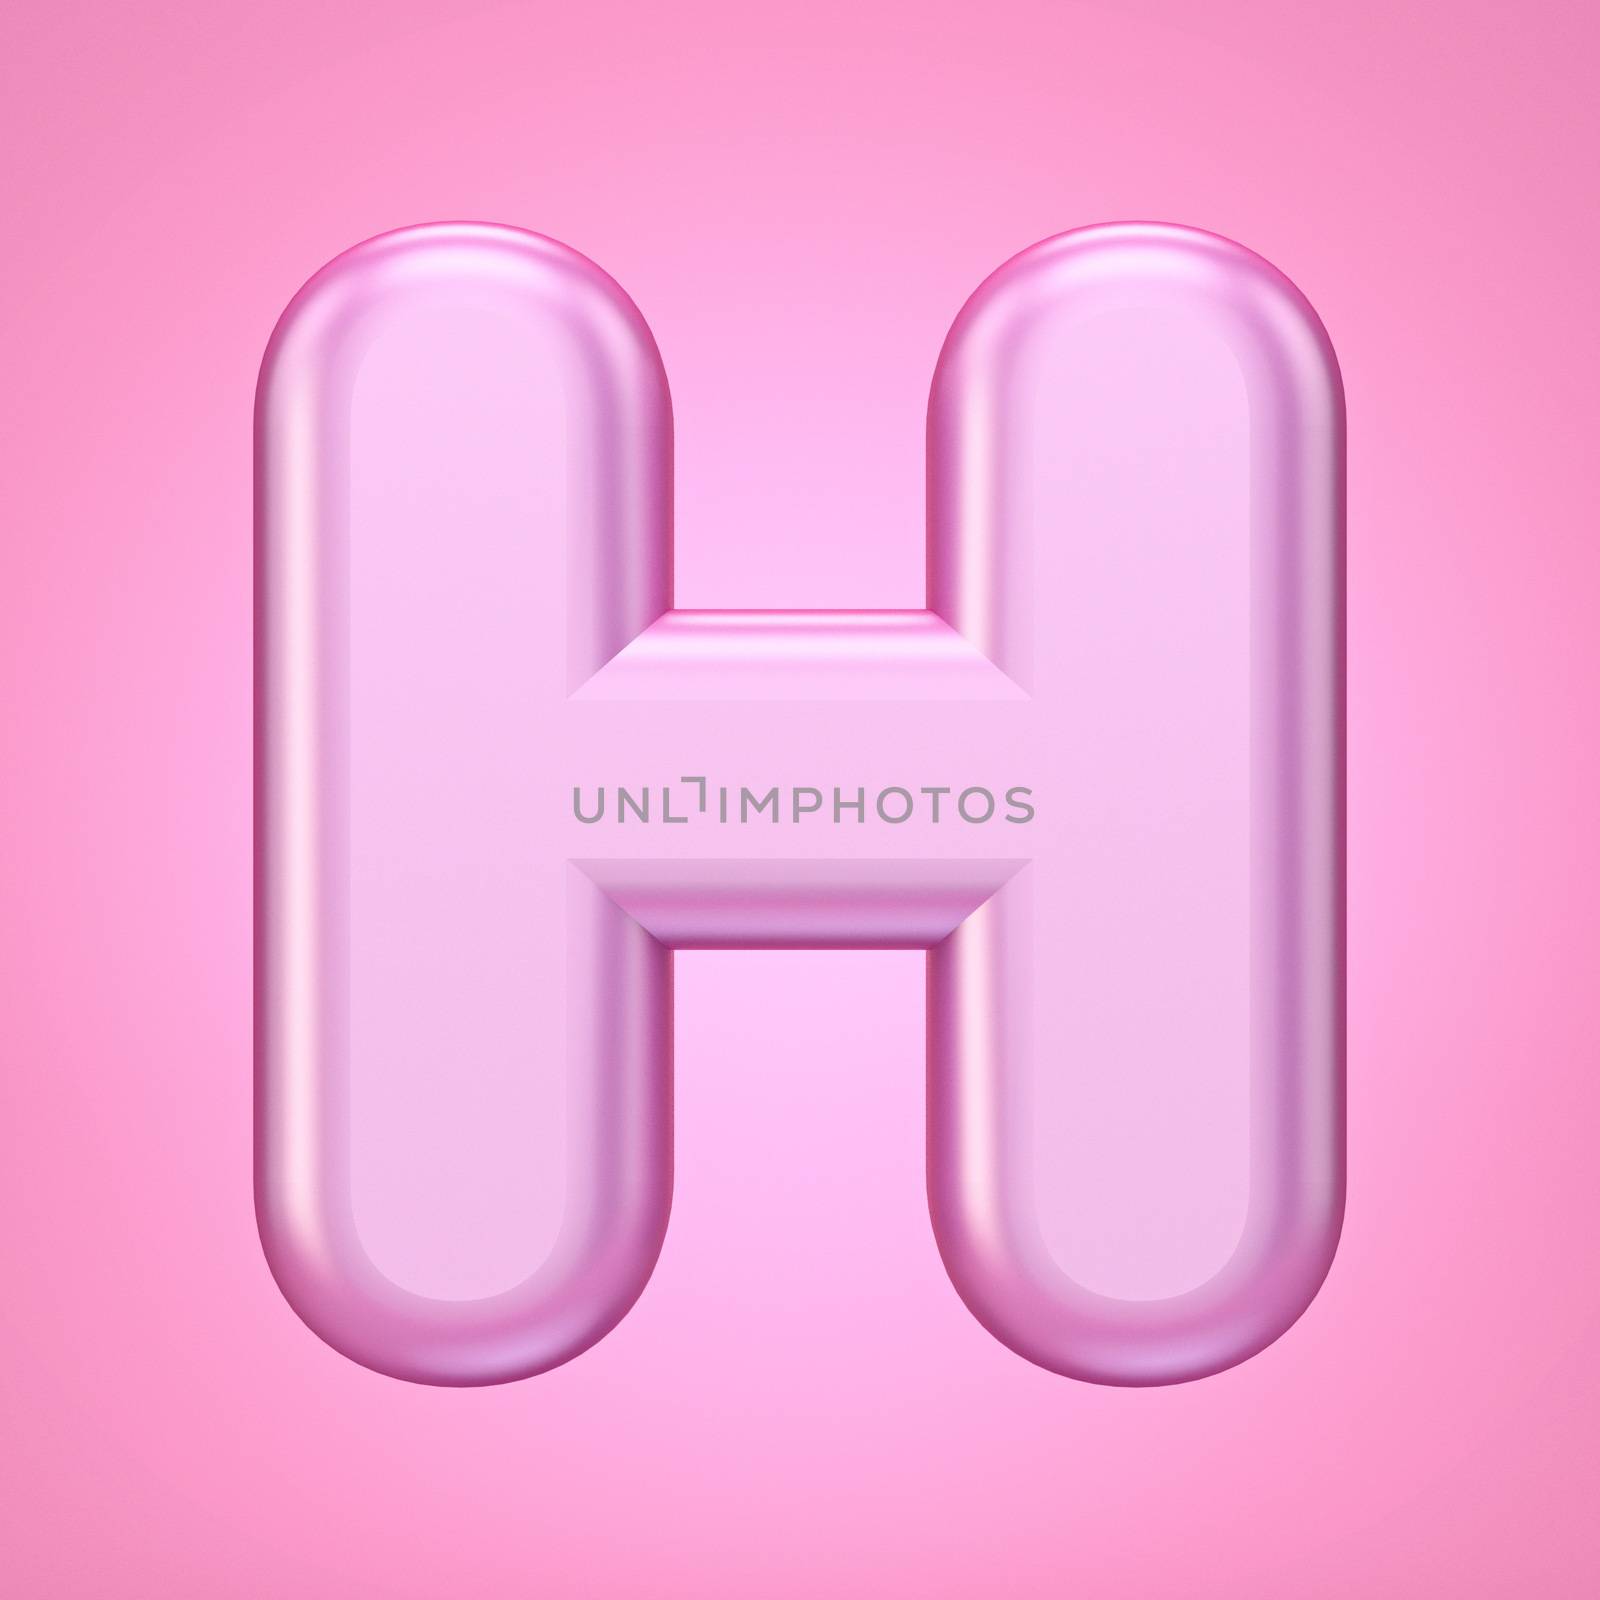 Pink font Letter H 3D rendering illustration isolated on white background